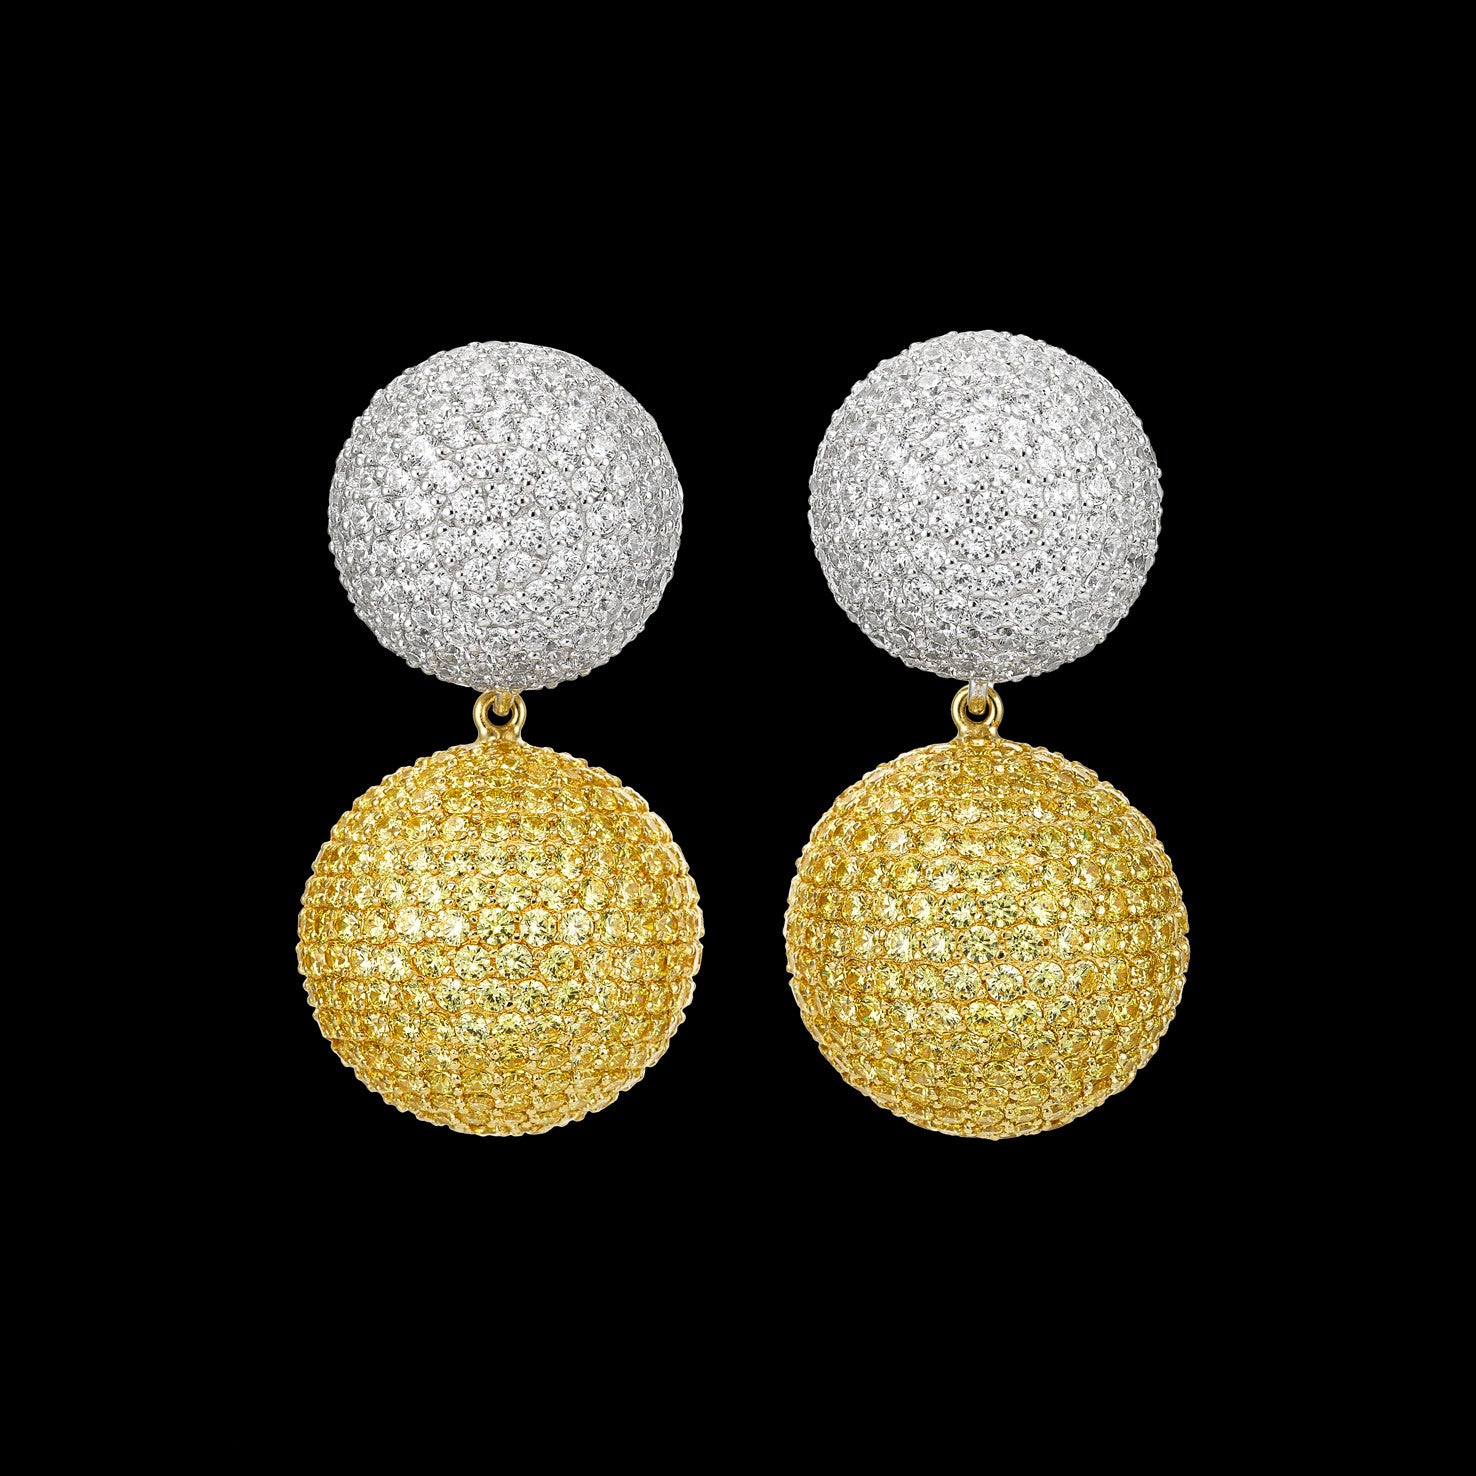 Fashion Women Earring Takerlama Party Jewelry Candy Color Balls